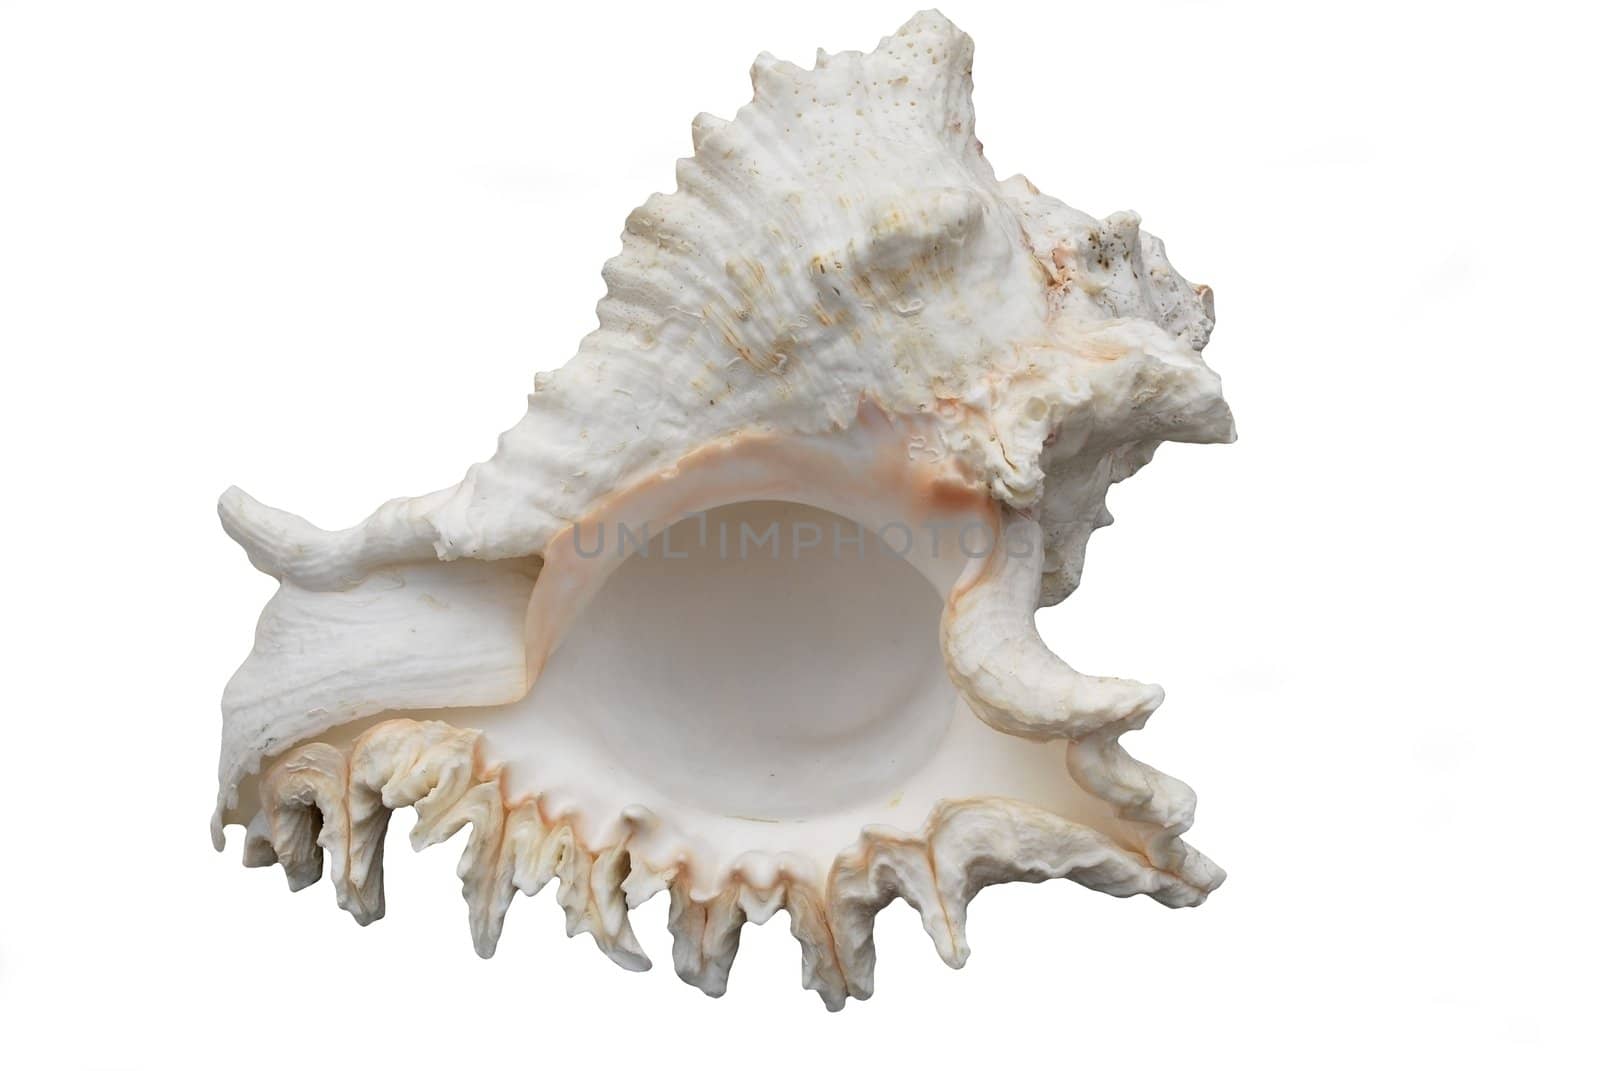  seashell from the  Adriatic sea, on the white backgrownd